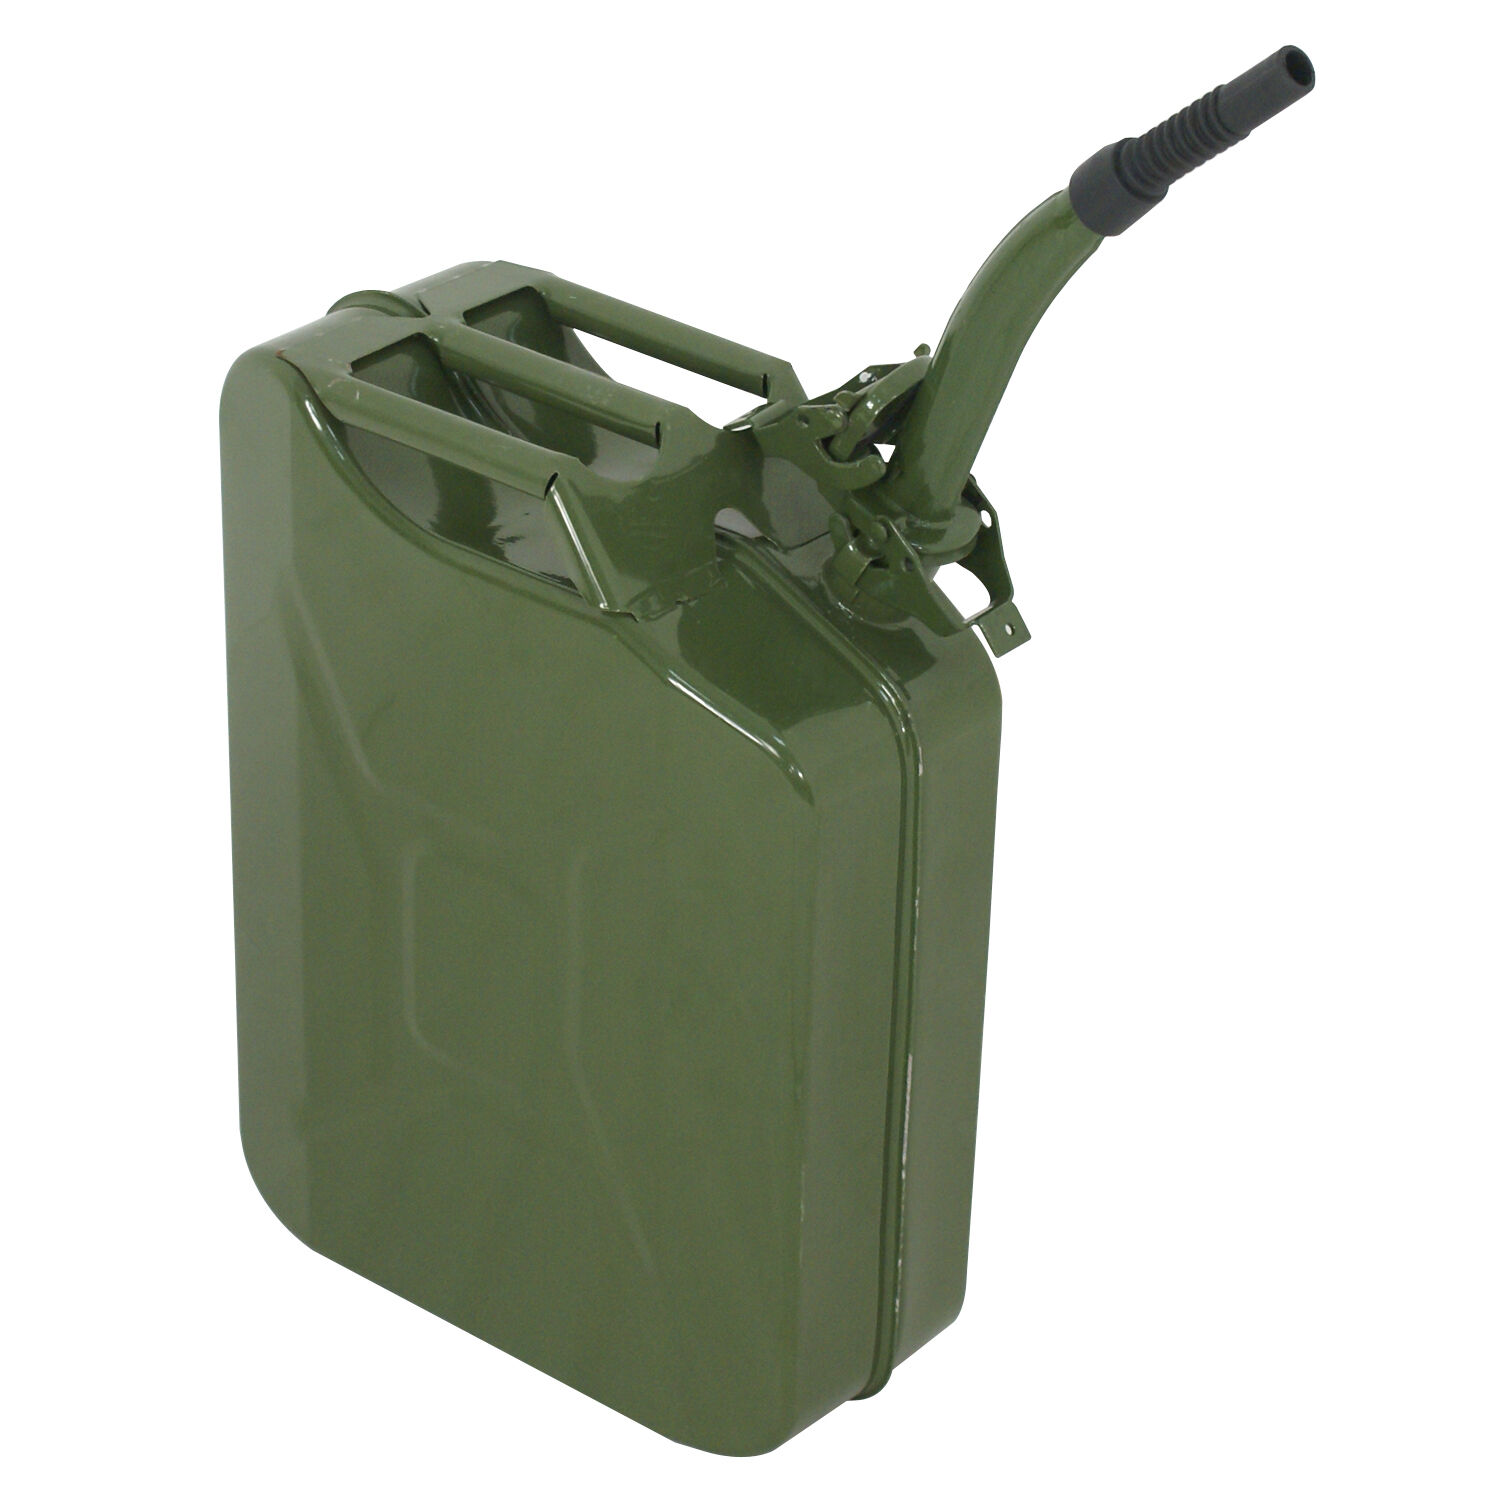 5 Gallon 20L Jerry Can Steel Gasoline Gas Fuel Tank Emergency Backup Military